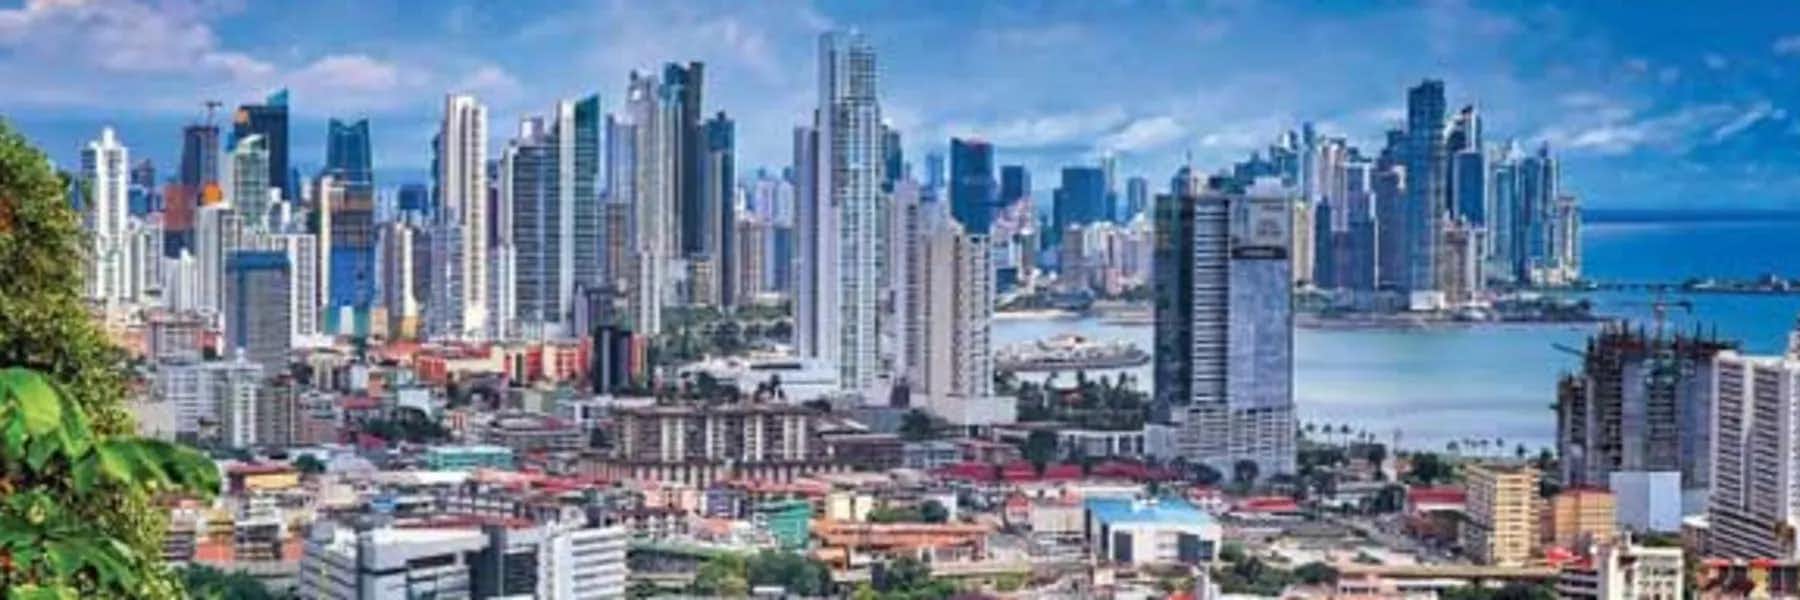 Panama is Poised for its Next Real Estate Boom